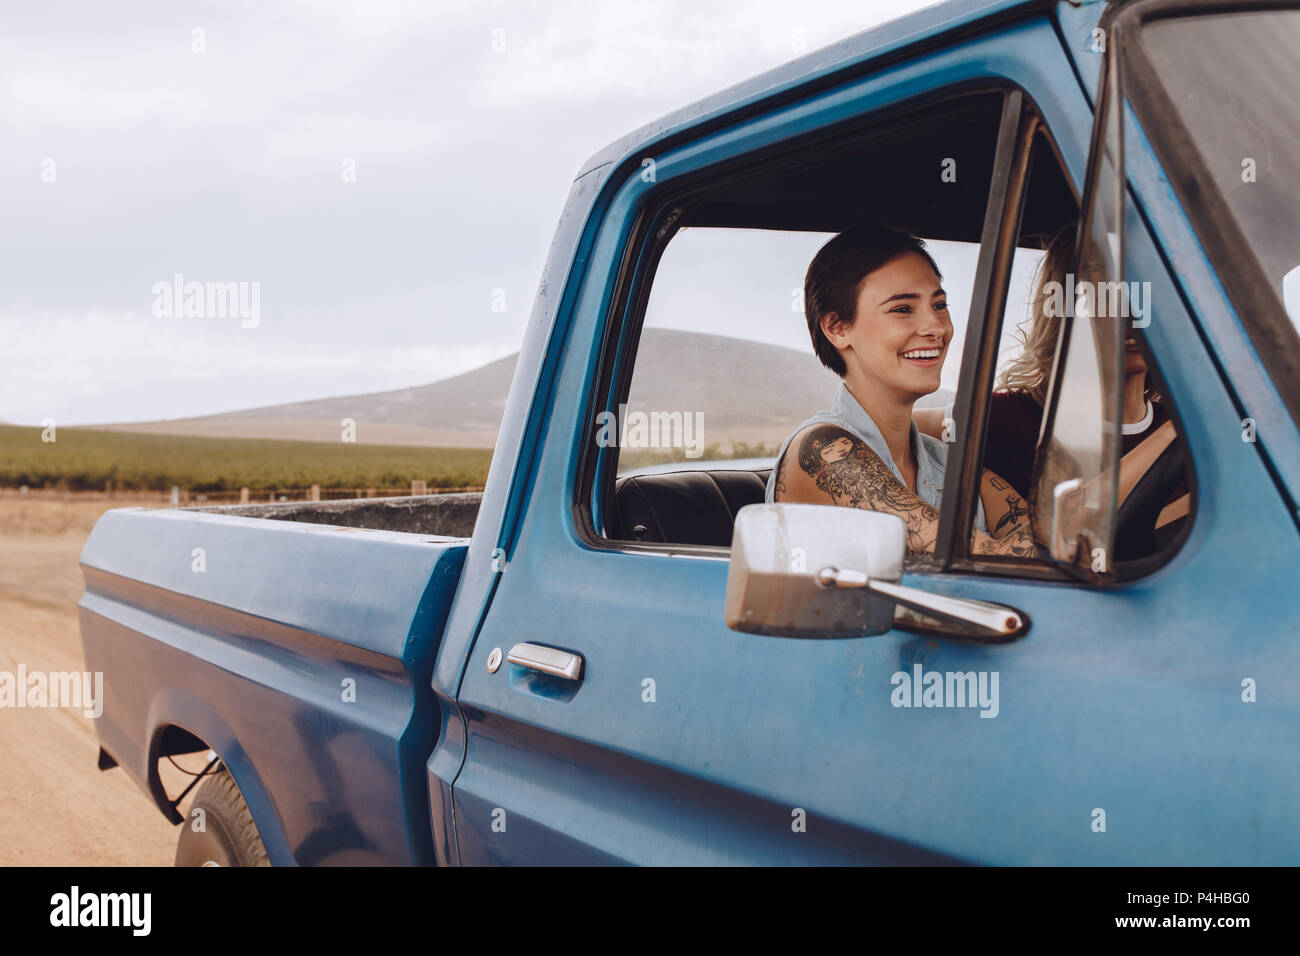 Smiling young woman driving a car on country road with female friend sitting next to her. Girls going on road trip. Stock Photo